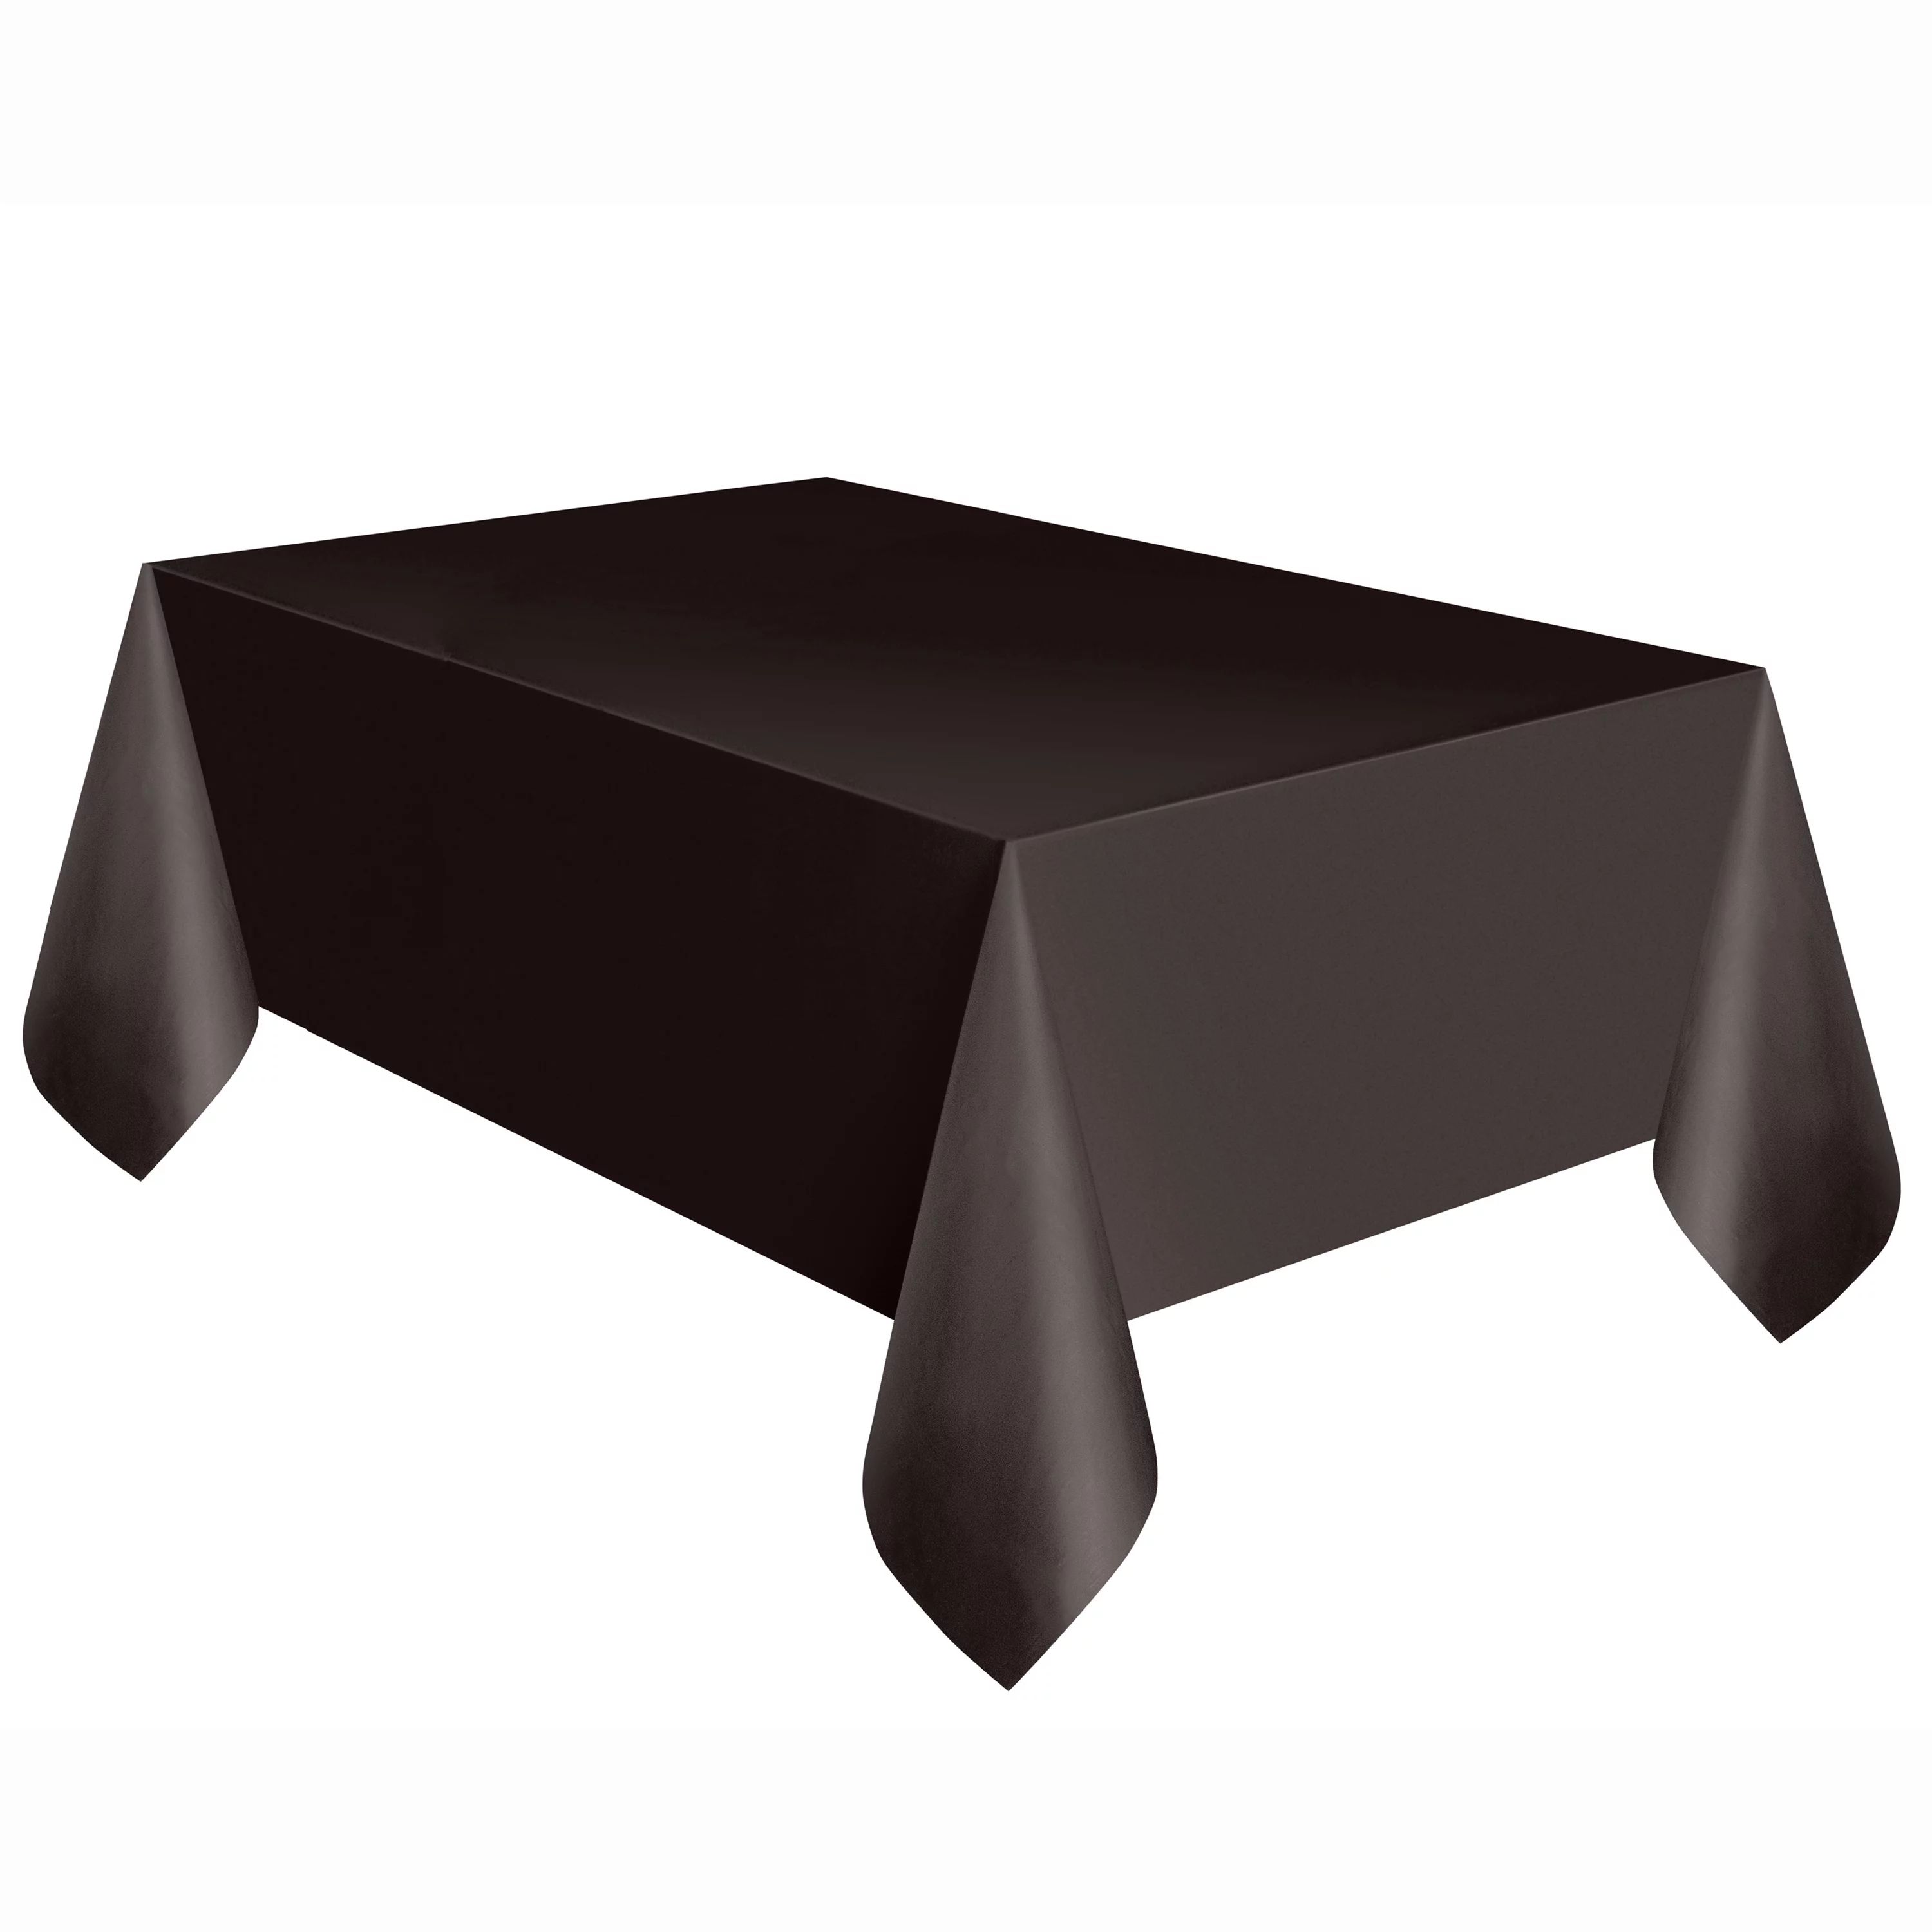 Way To Celebrate! Black Plastic Party Tablecloth, 108in x 54in | Walmart (US)